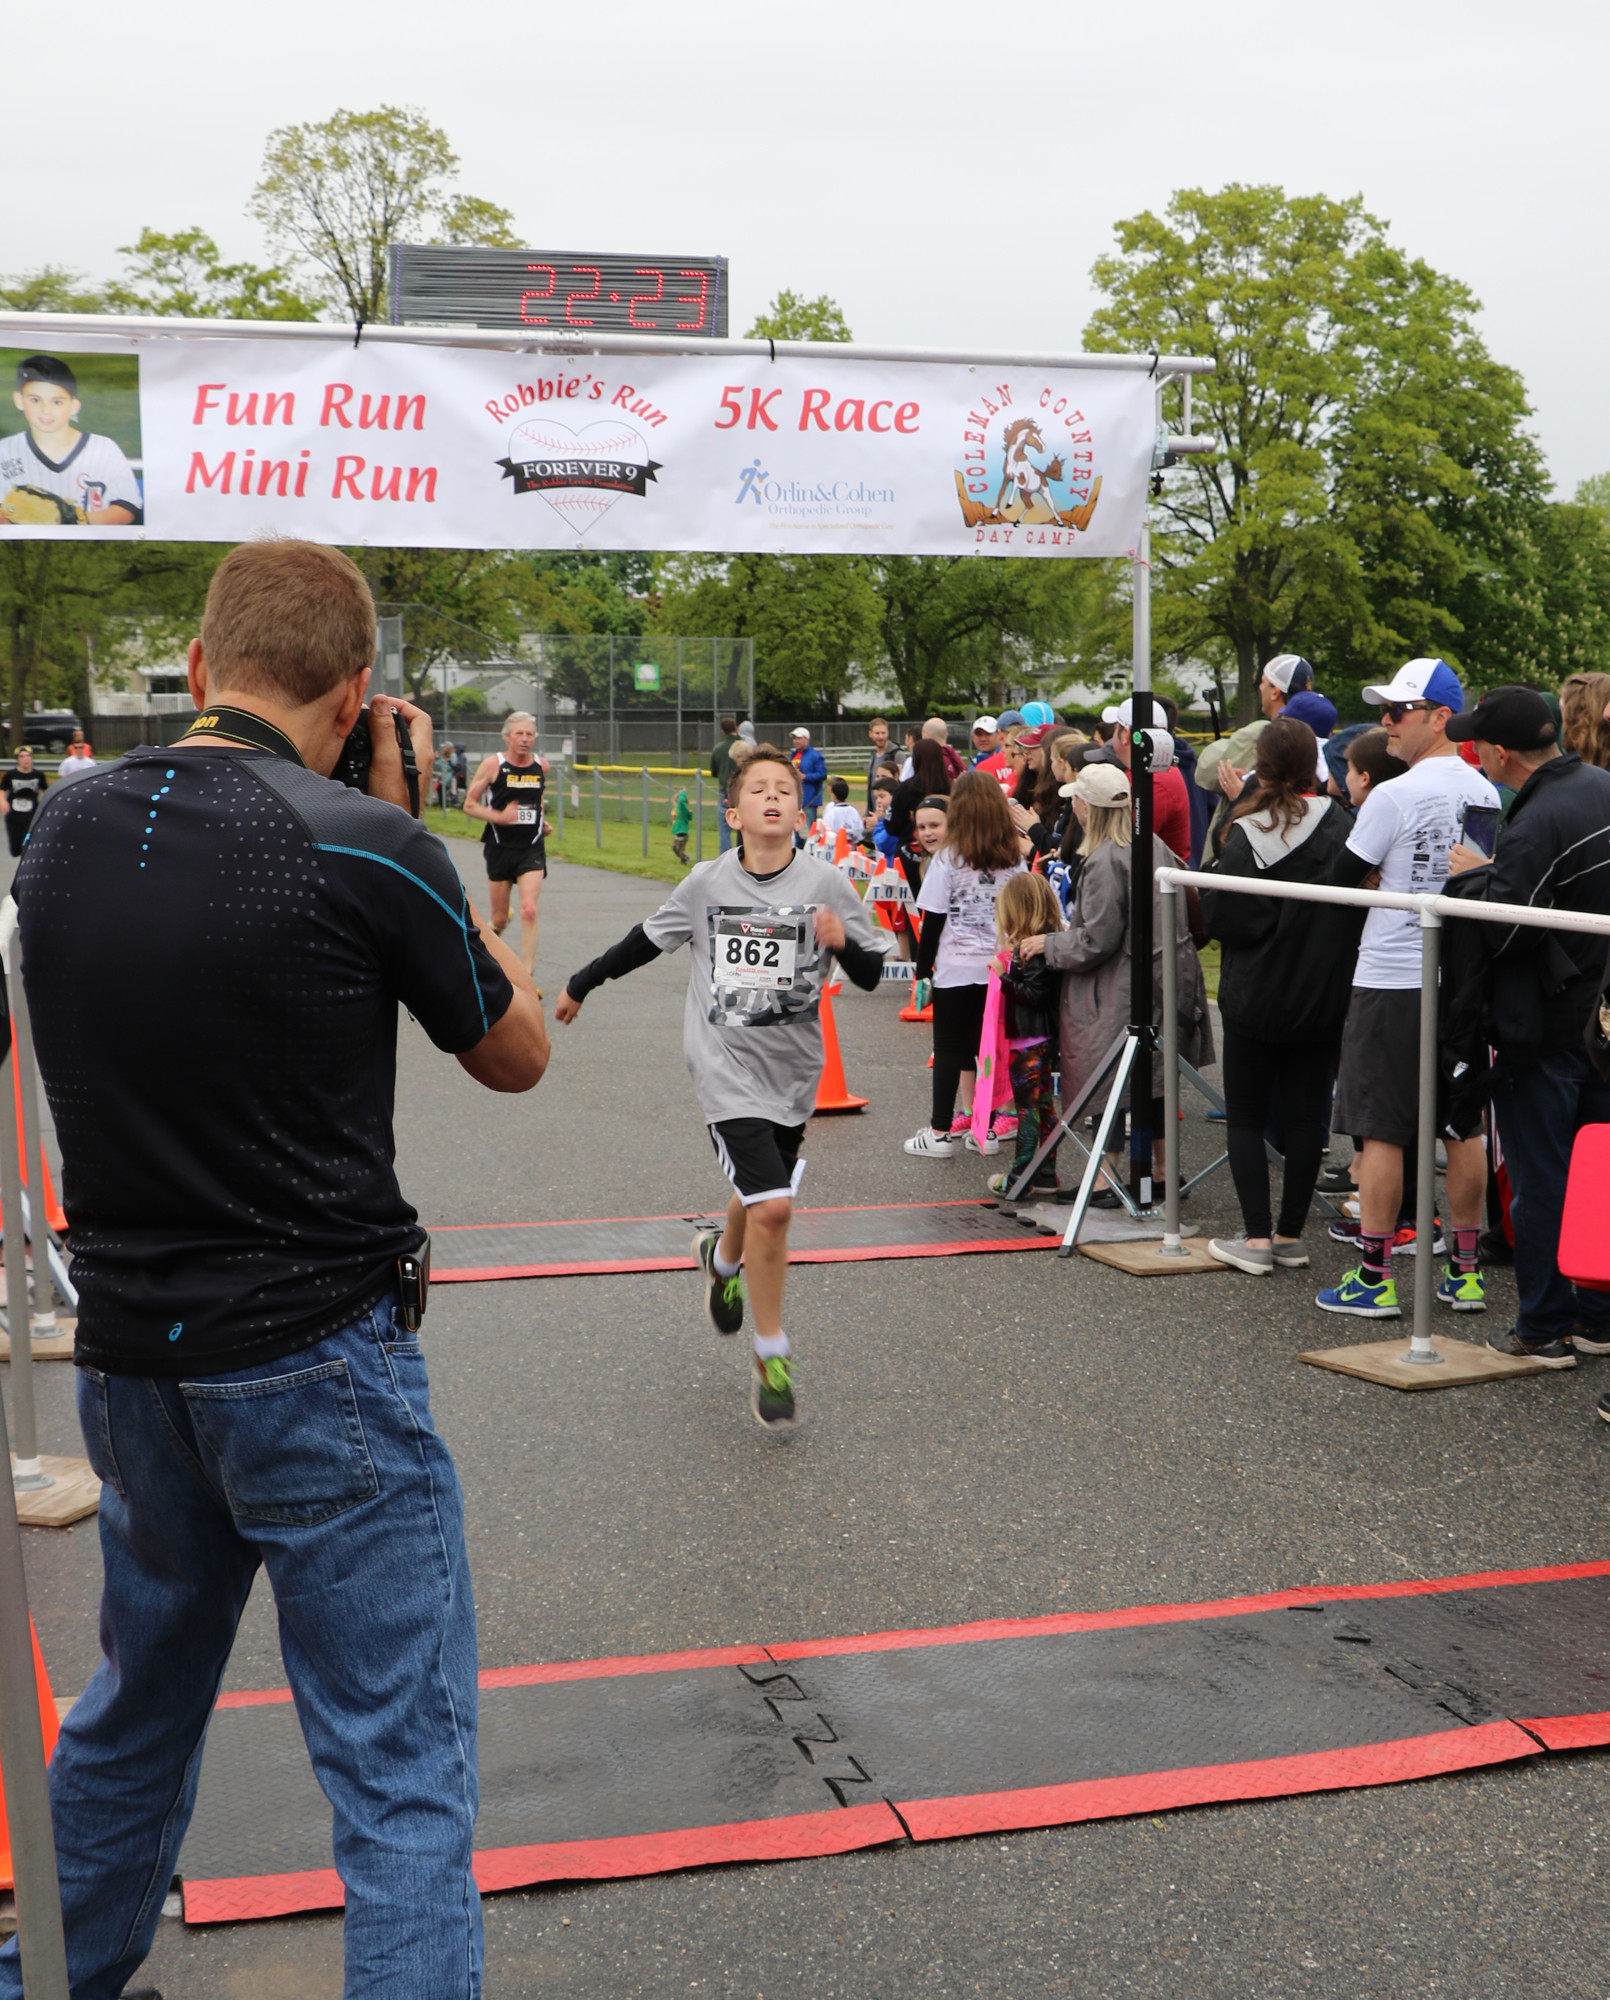 Above, Ethan Lowenstein, 11, finished fourth in the 11- to 14-year-old age group.